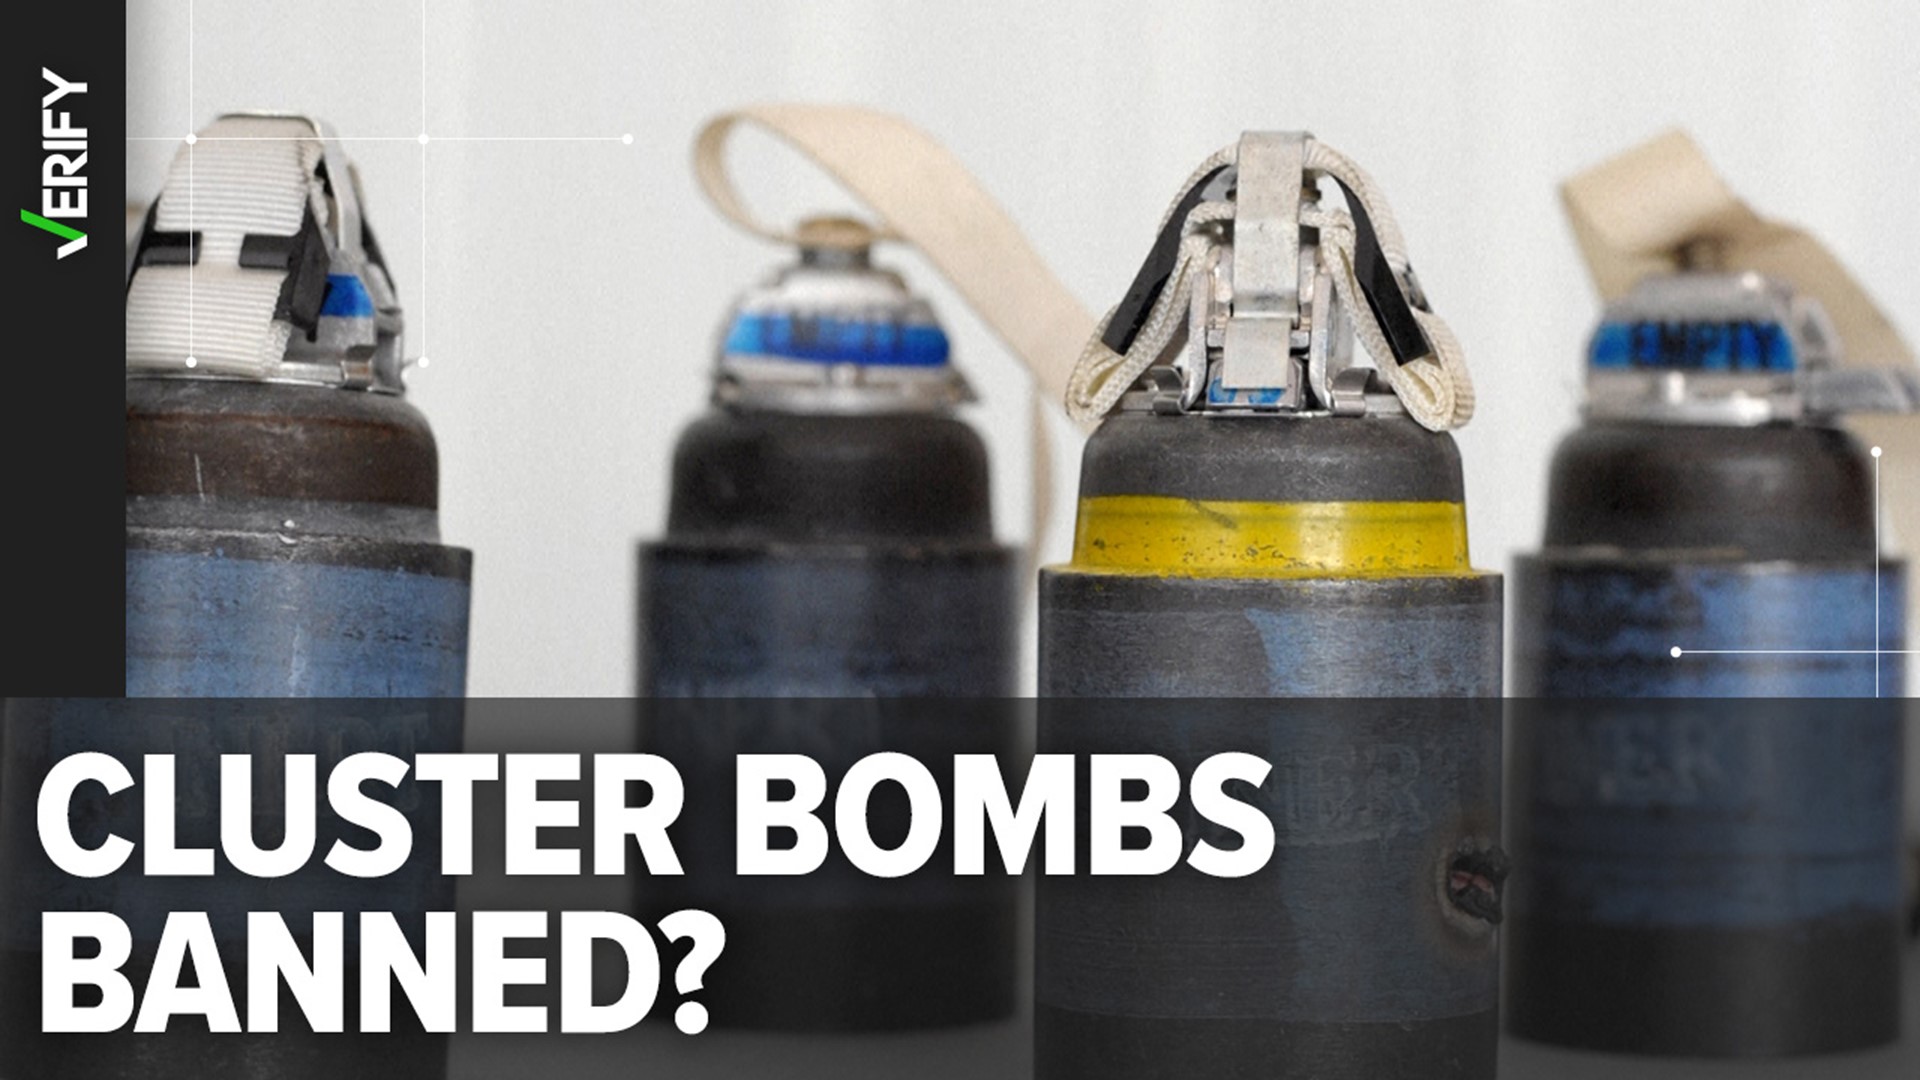 Online posts claim more than 100 countries have banned cluster bombs. Here’s what we can VERIFY.